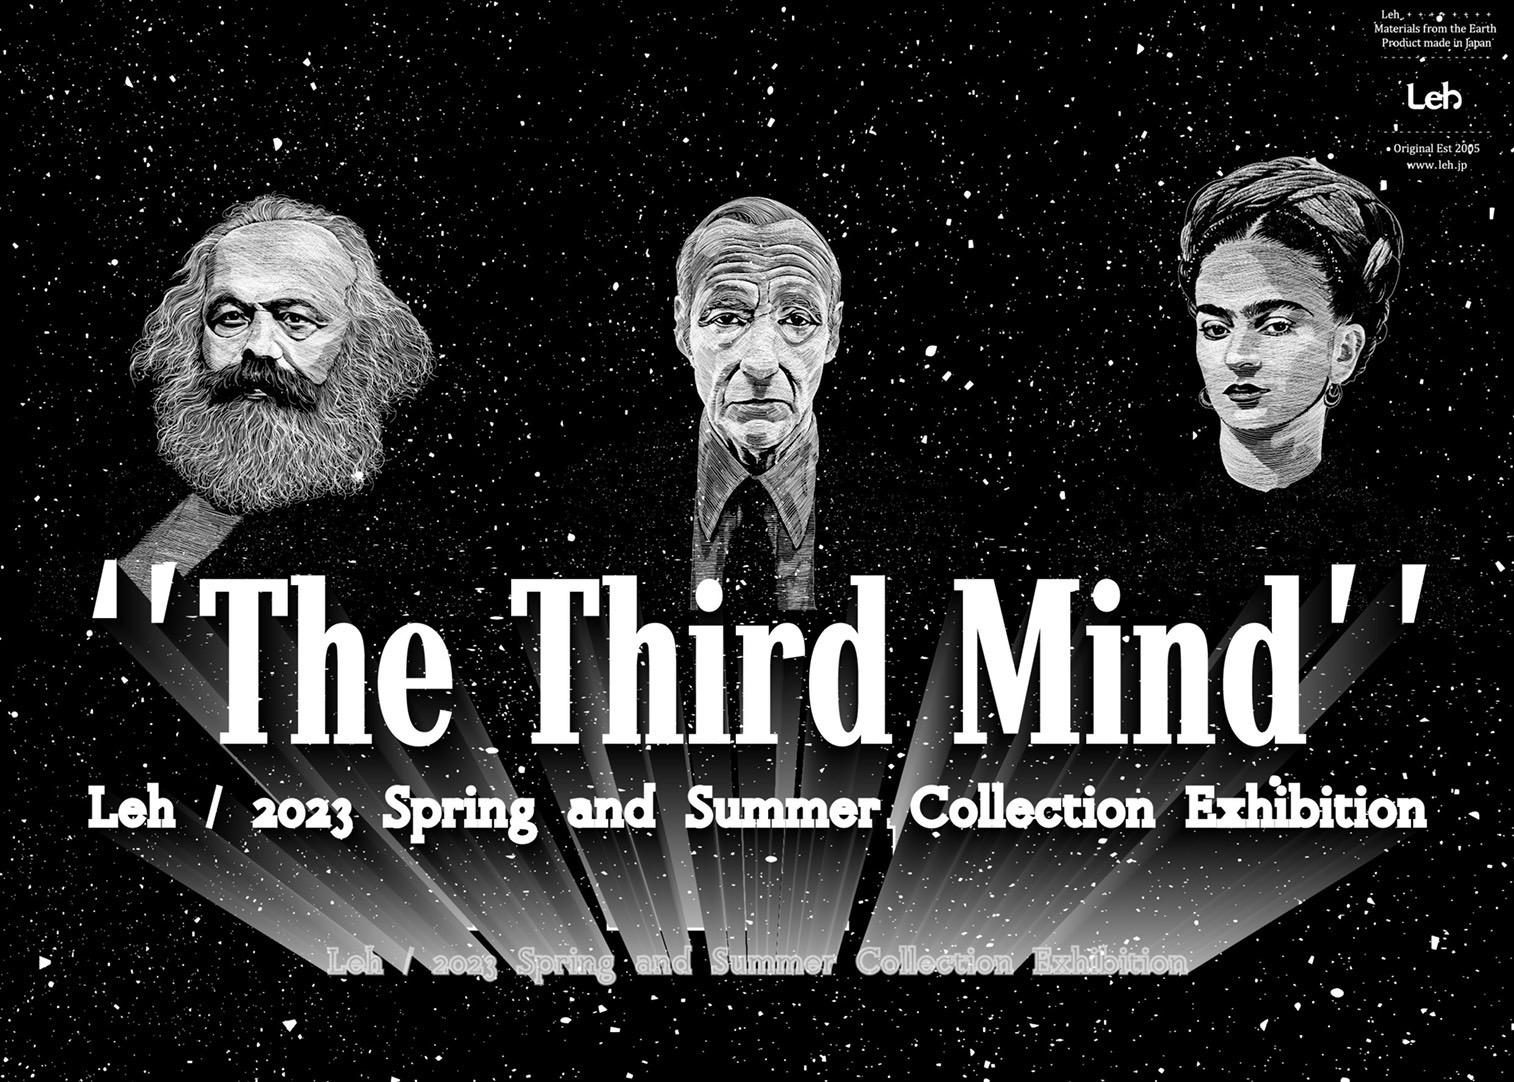 Leh / 2023 SS Collection Exhibition “The Third Mind”